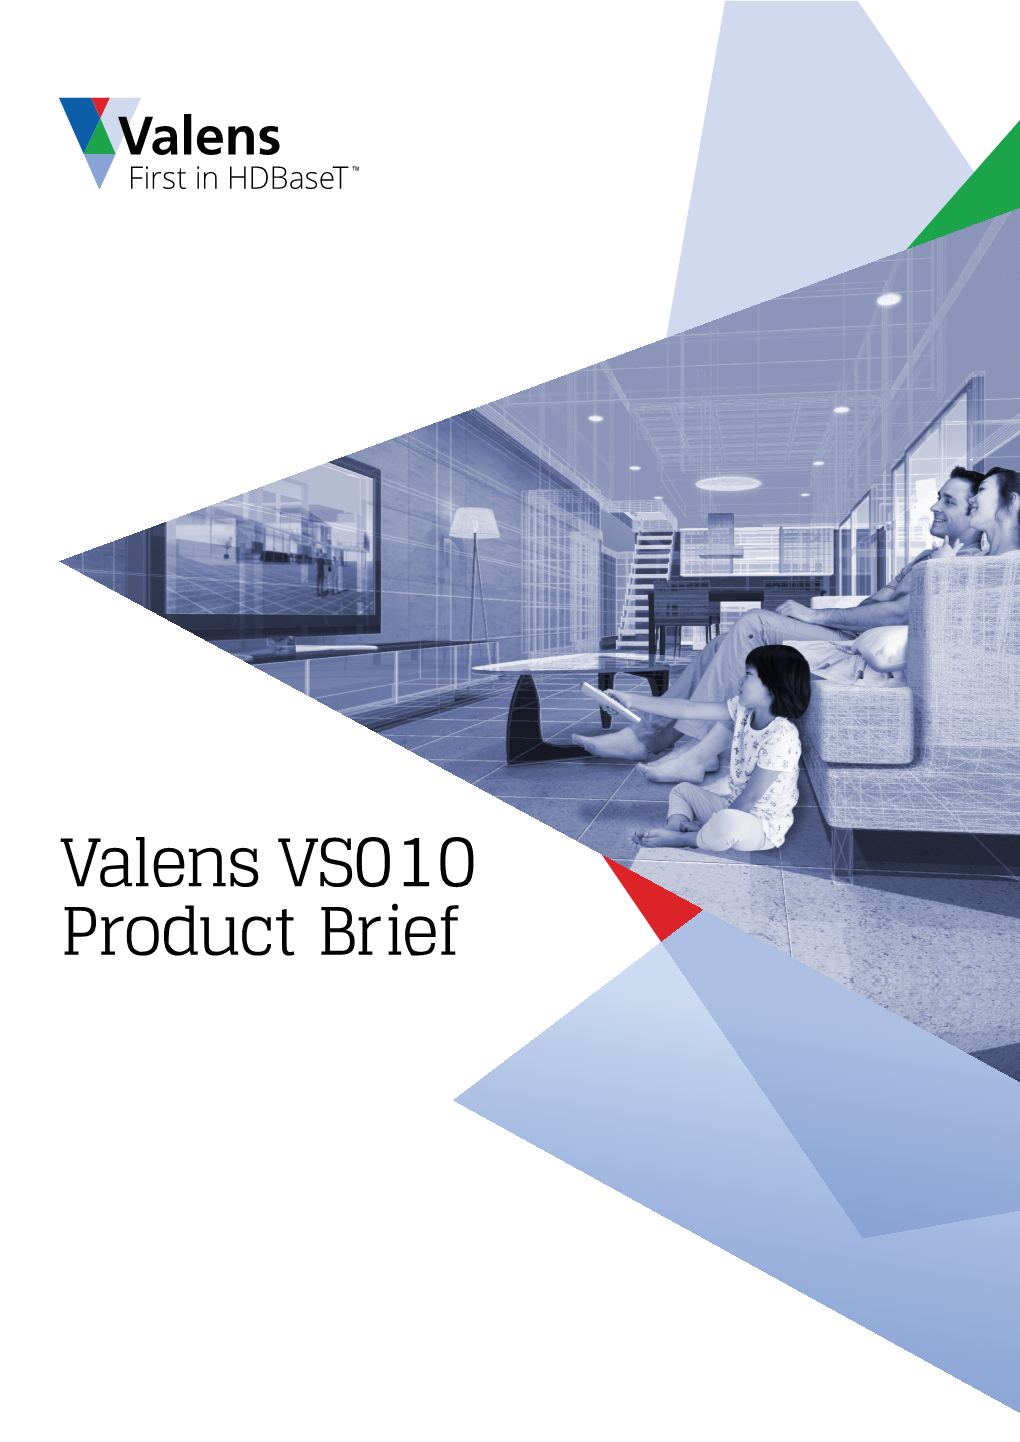 Valens VS010 Product Brief Overview